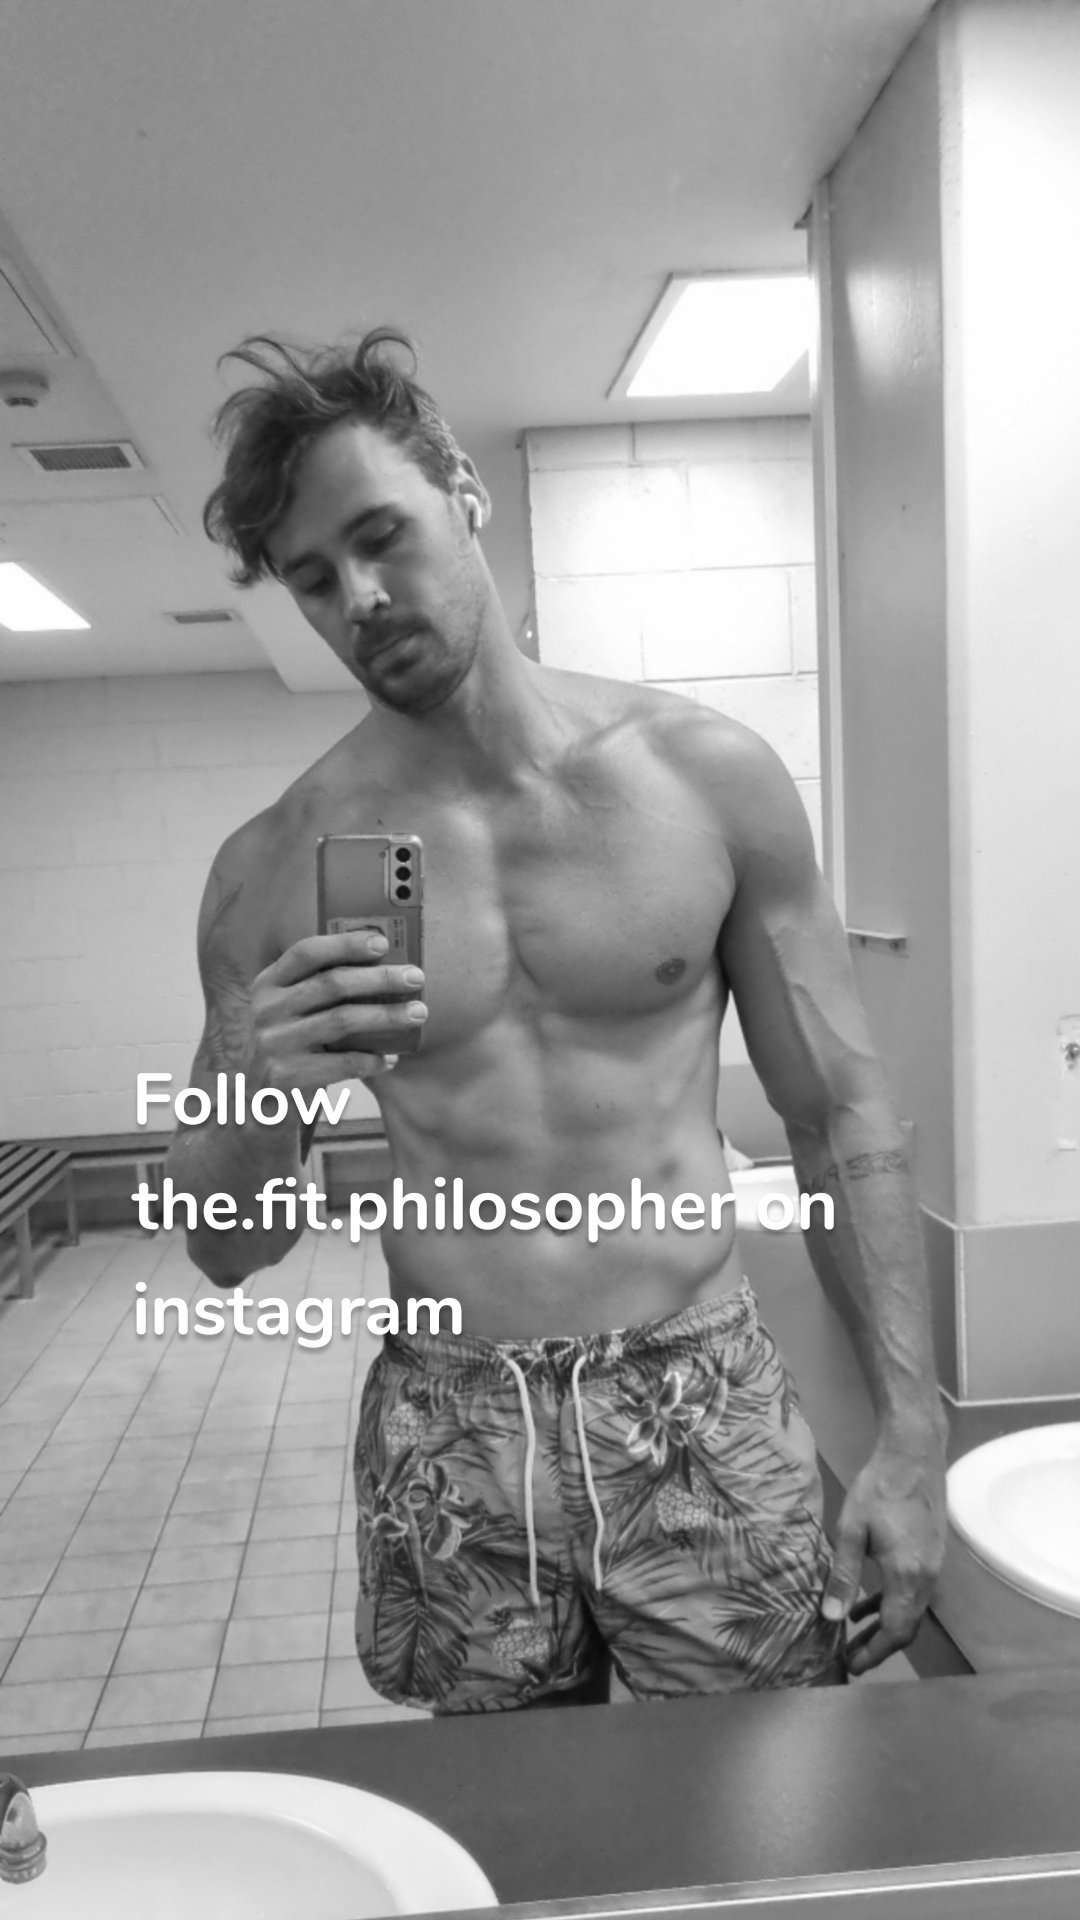 Follow the.fit.philosopher on instagram